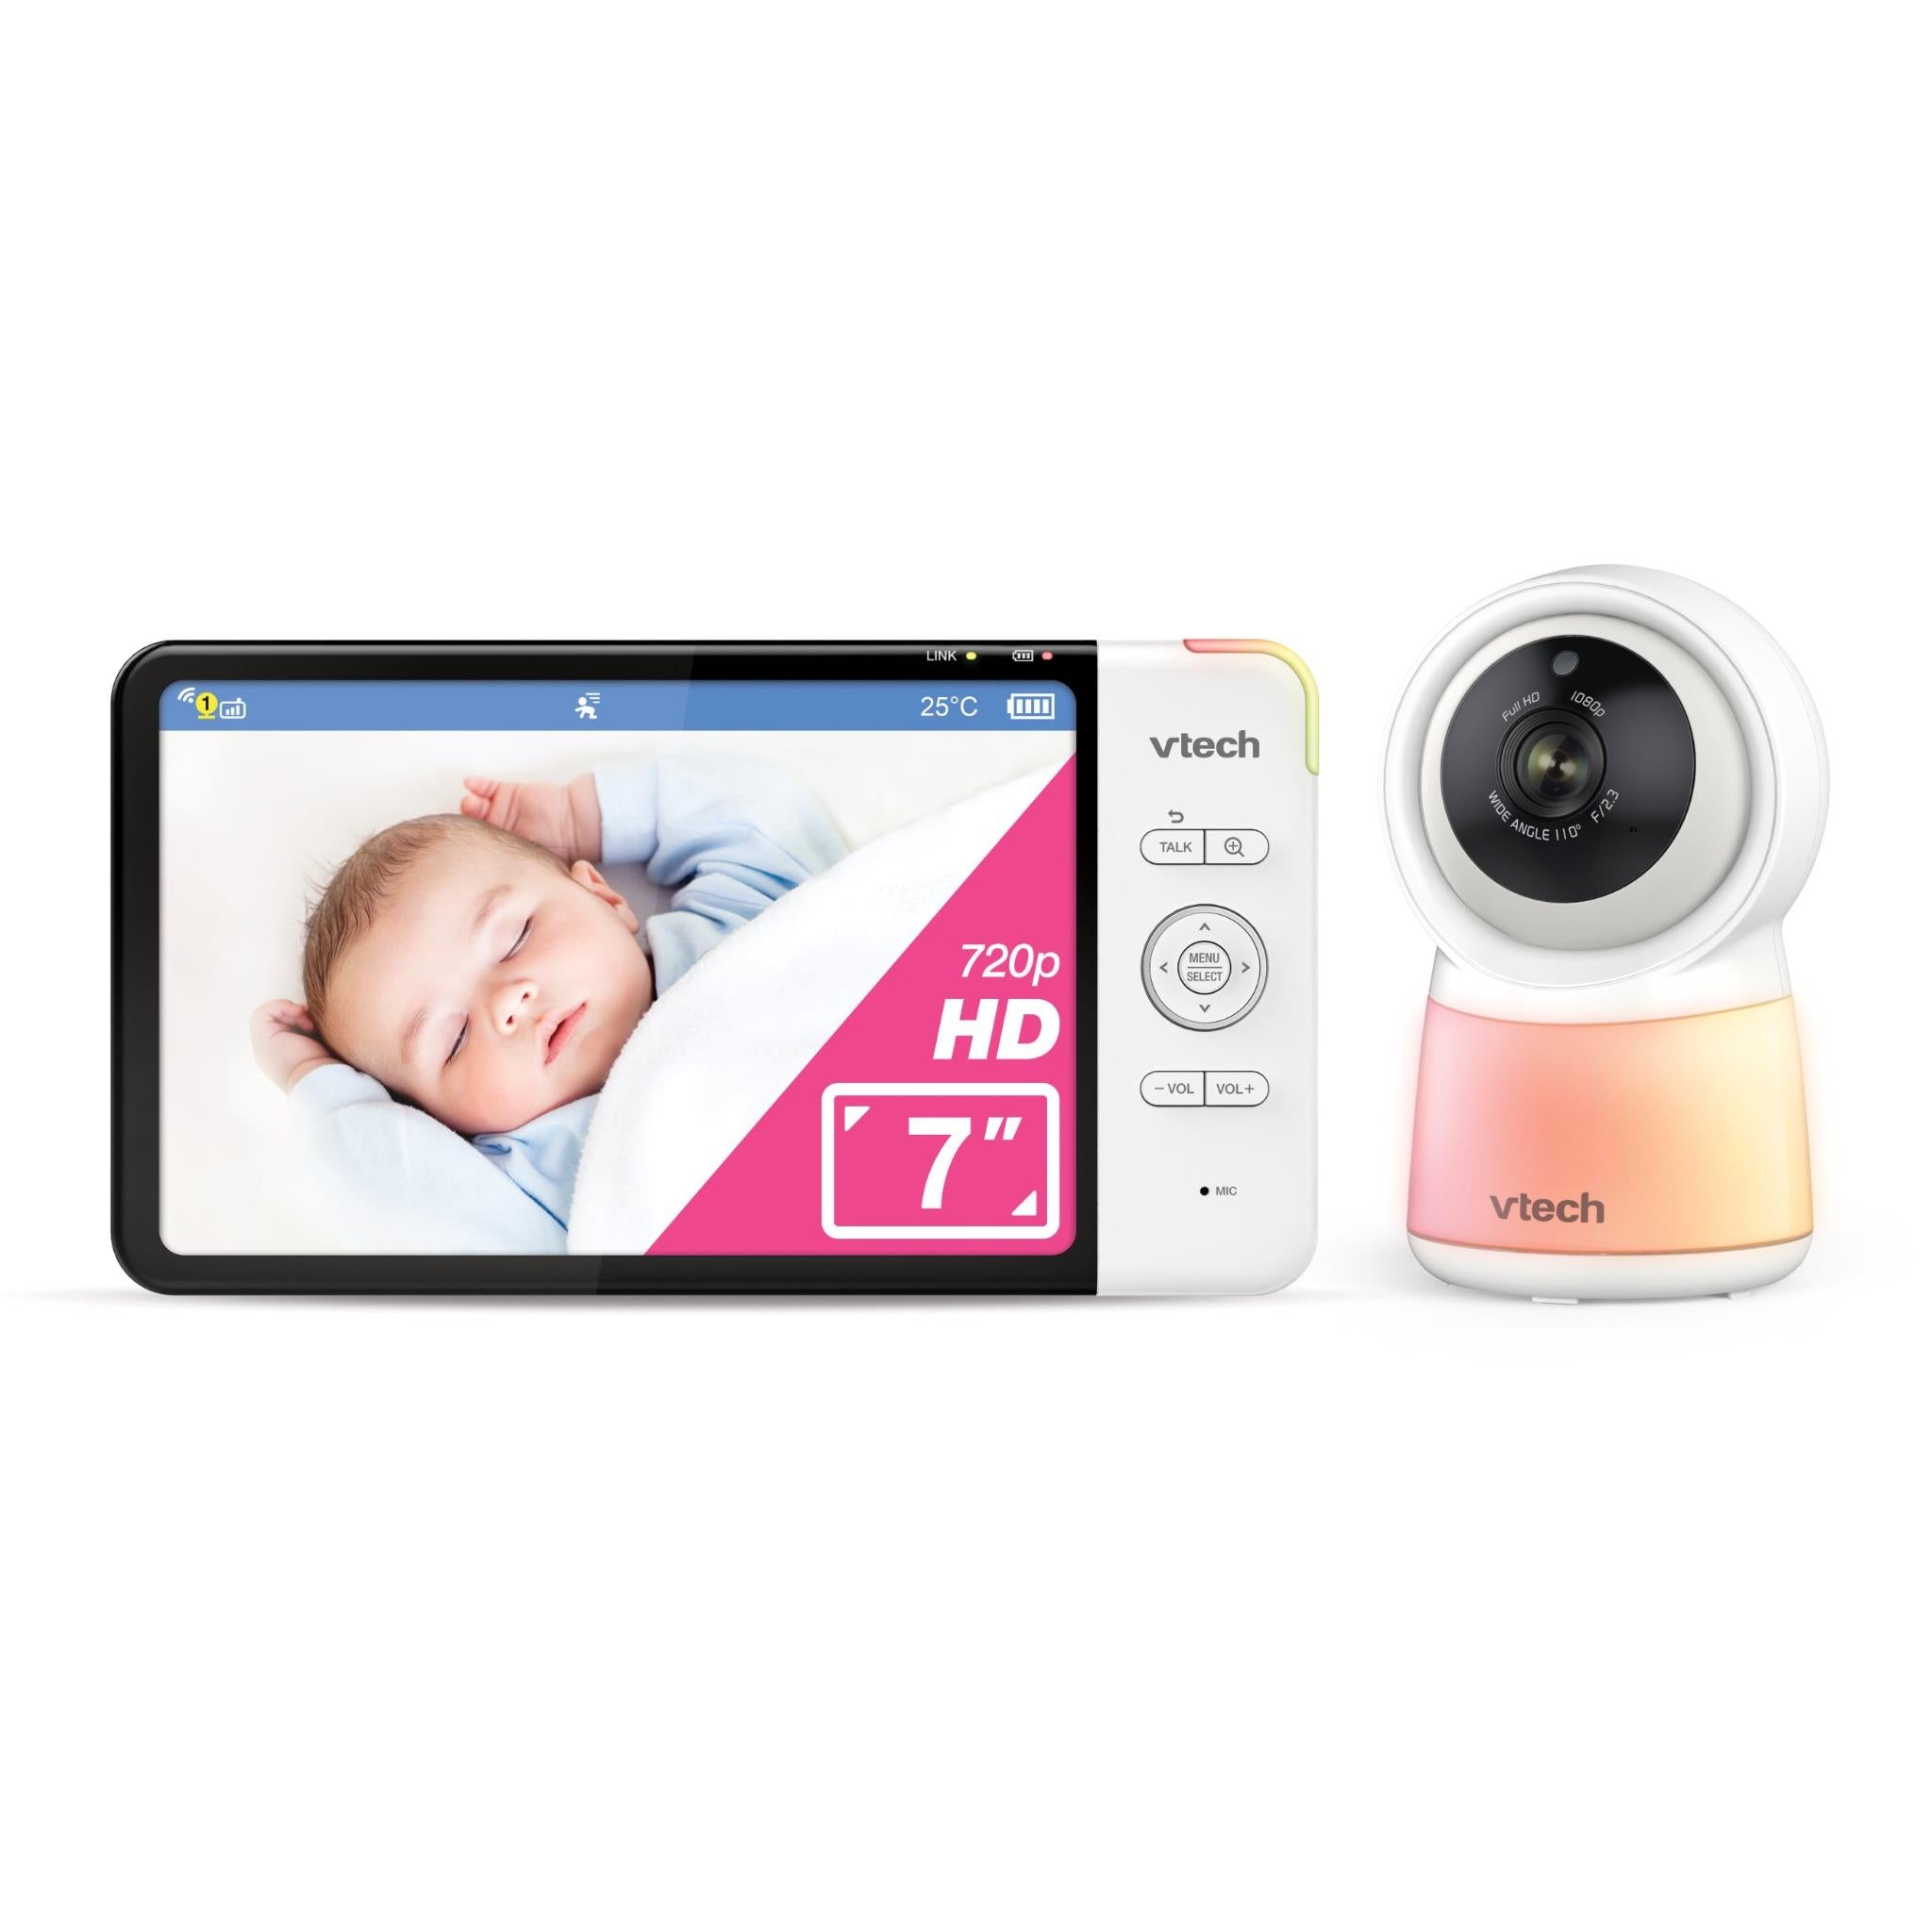 vtech rm7754hdv2 7” smart hd video monitor with remote access